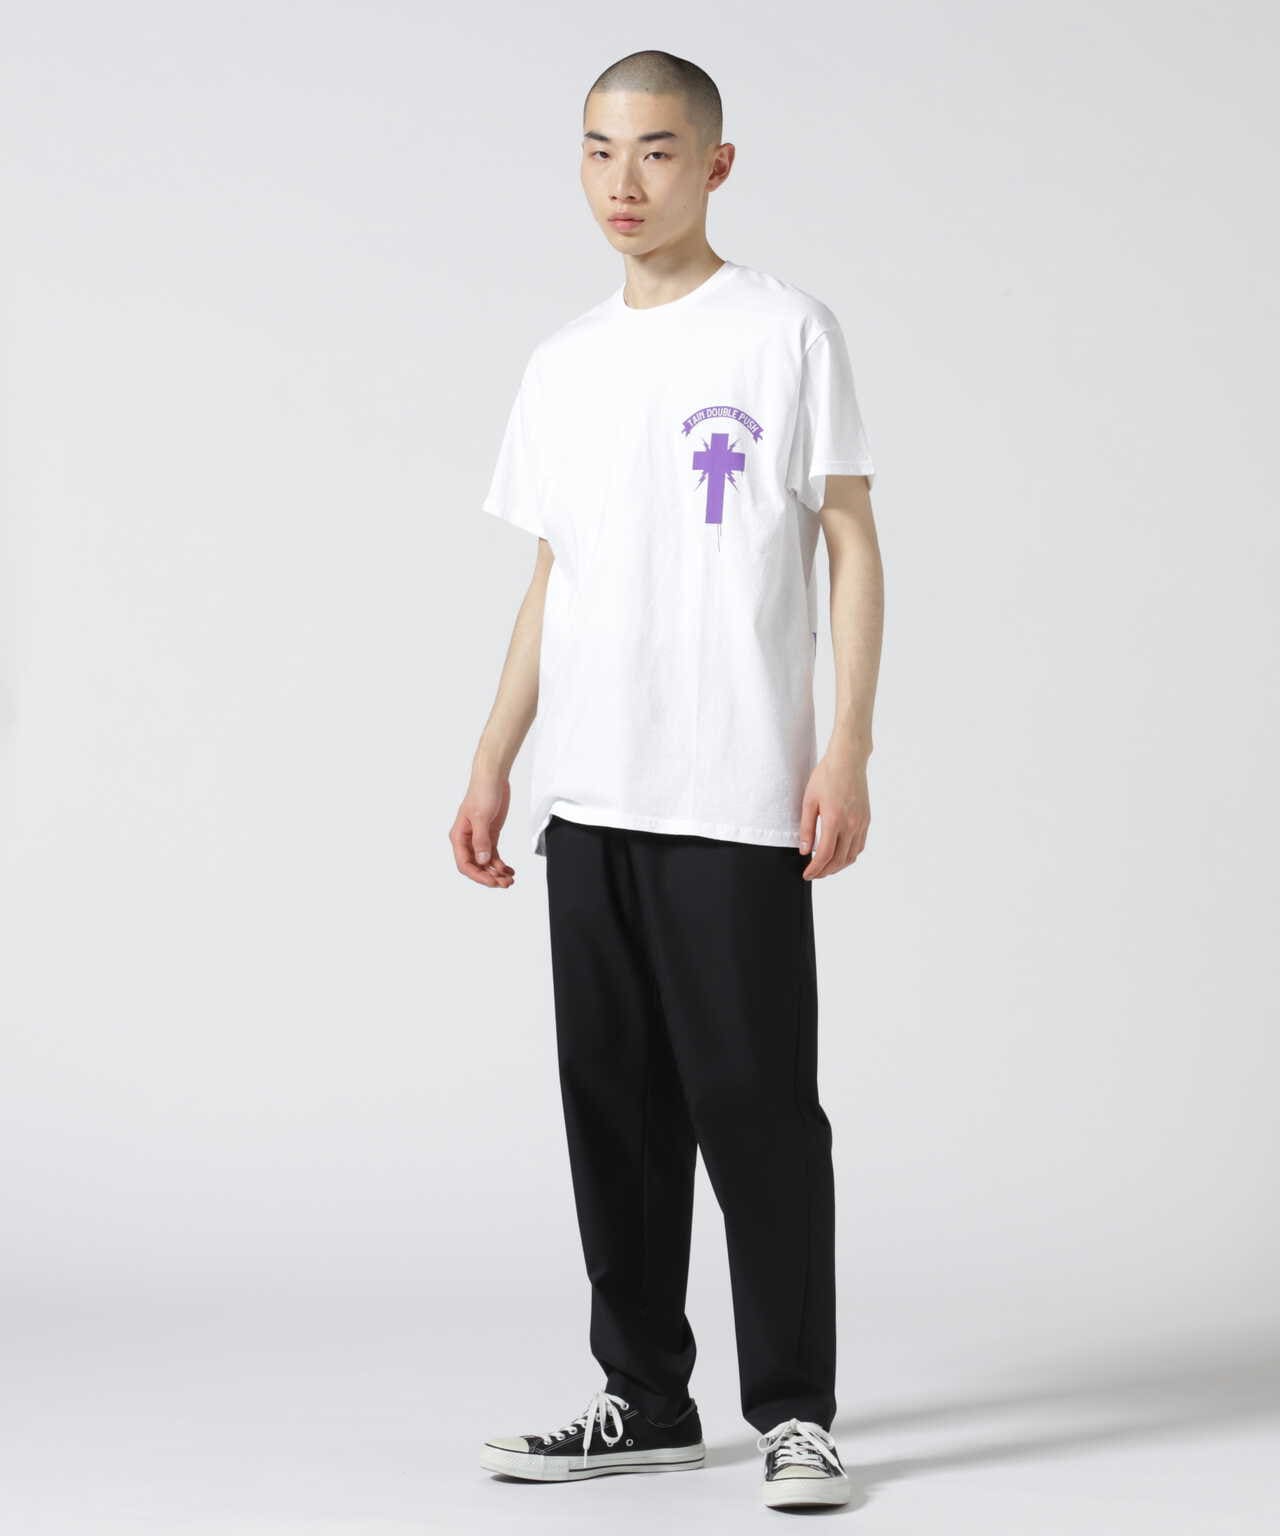 TAIN DOUBLE PUS WITH ME SHORT SLEEVE TEE